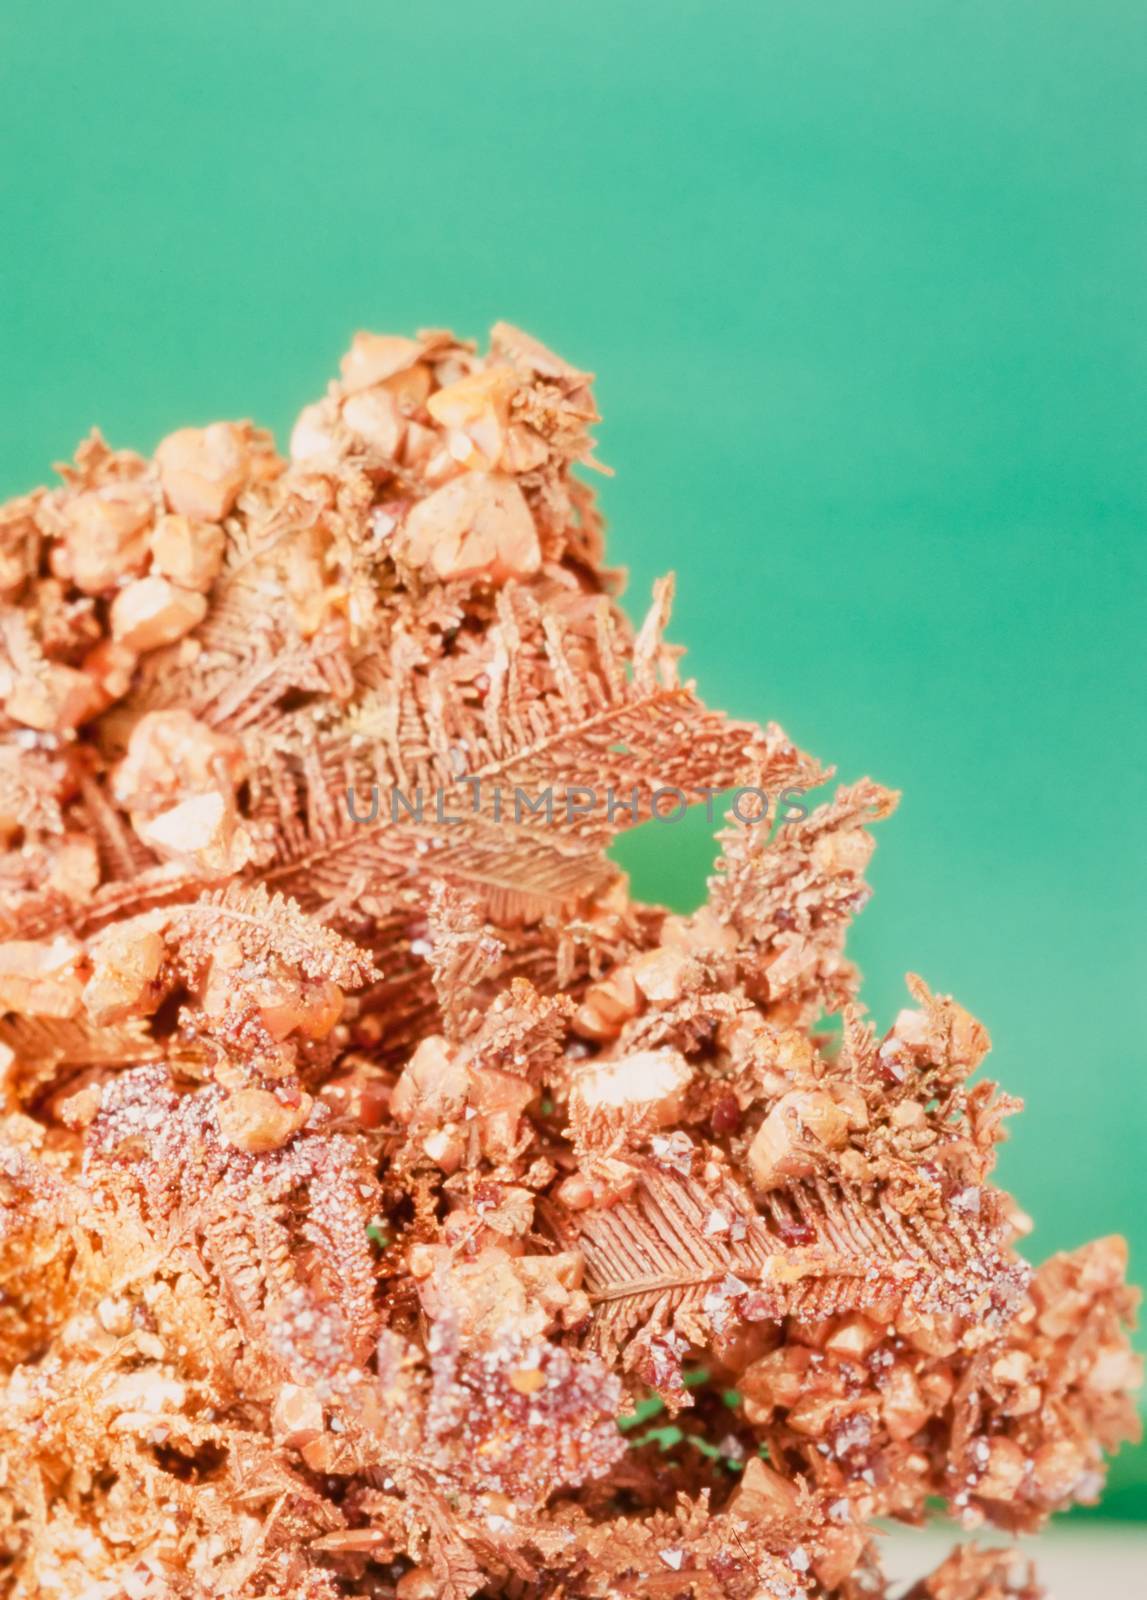 Native copper crystalline metal mineral rock against neutral green background